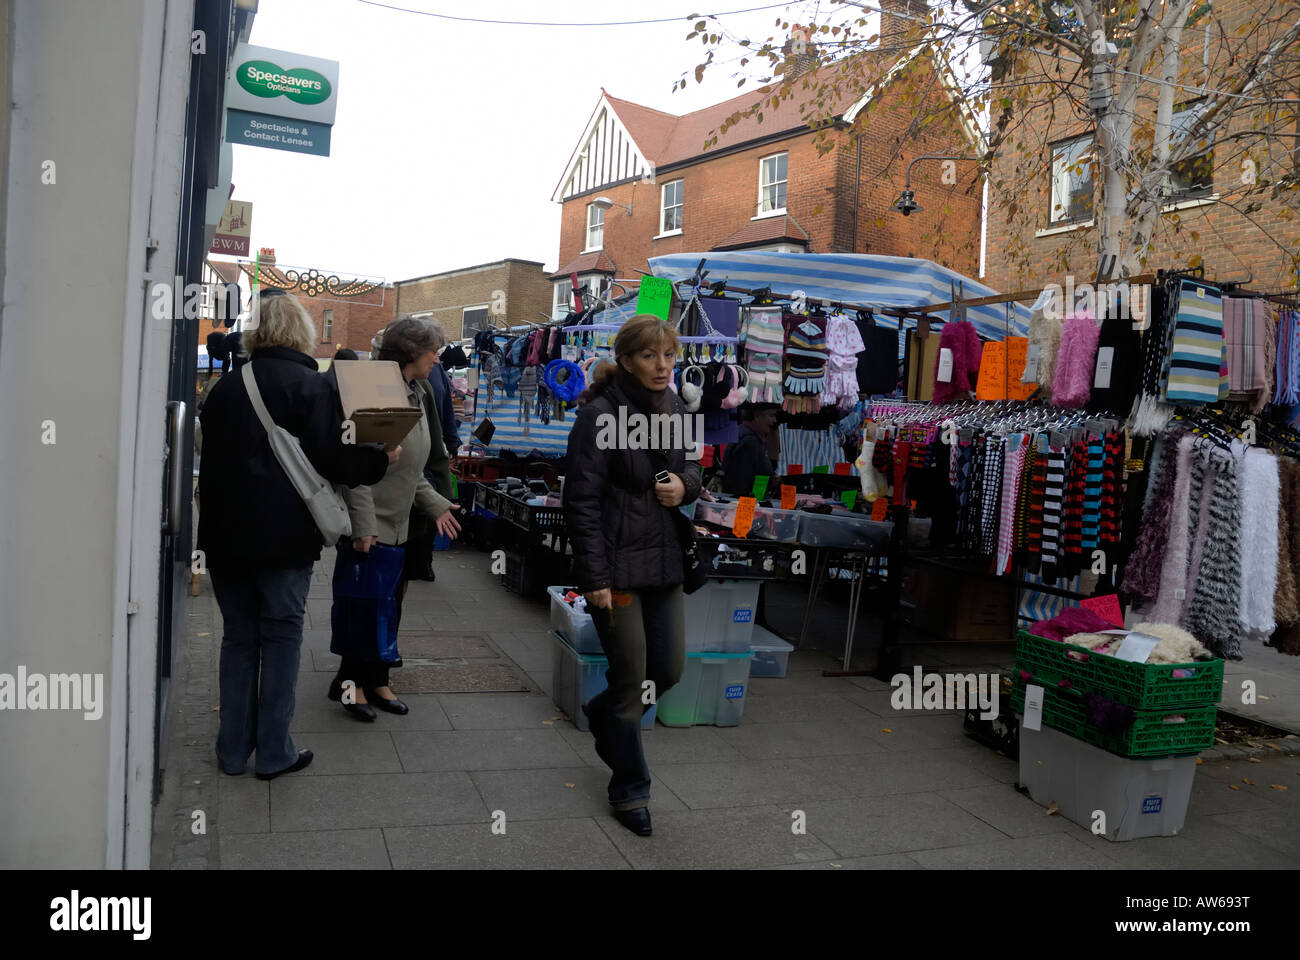 Woman looking at photographer during Market Day in Bishops Stortford Hertfordshire Stock Photo